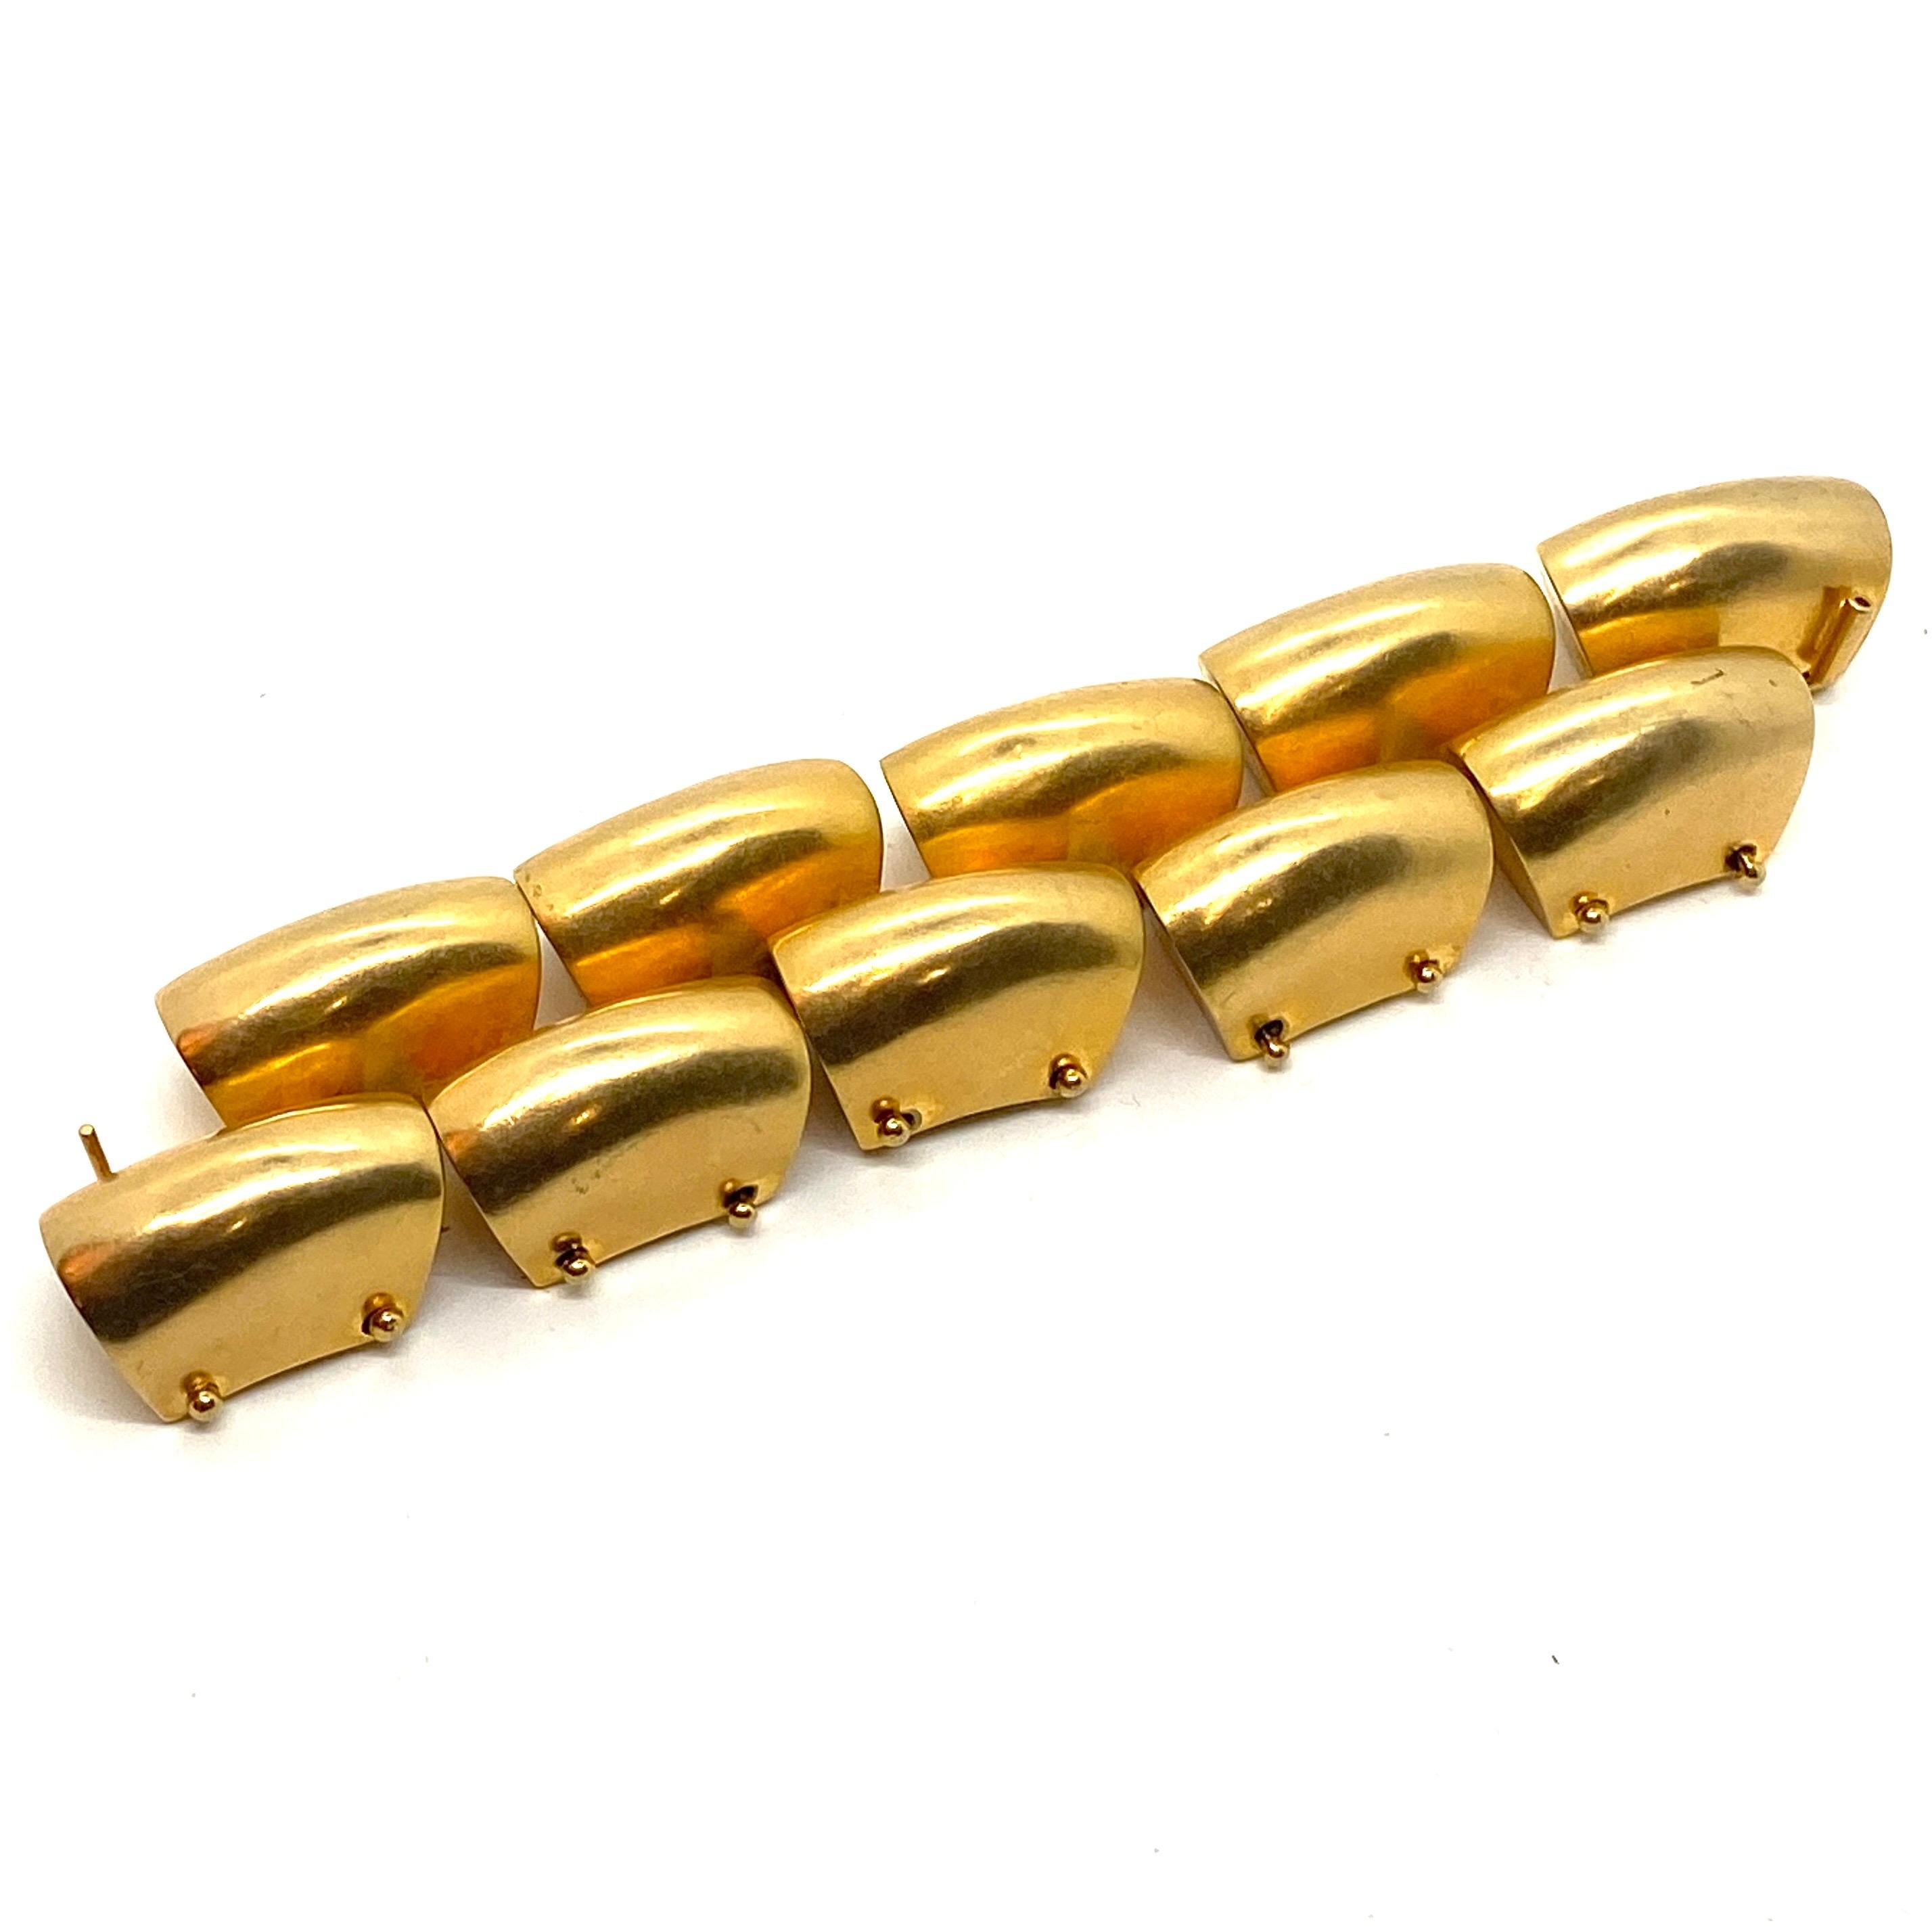 The matte gold plated brass Tire Track link bracelet by Robert Lee Morris is typical of his chunky and gutsy style of fashion jewelry. Created by multiple techniques that gave a truncated, chopped and organic casting that could be turned into a